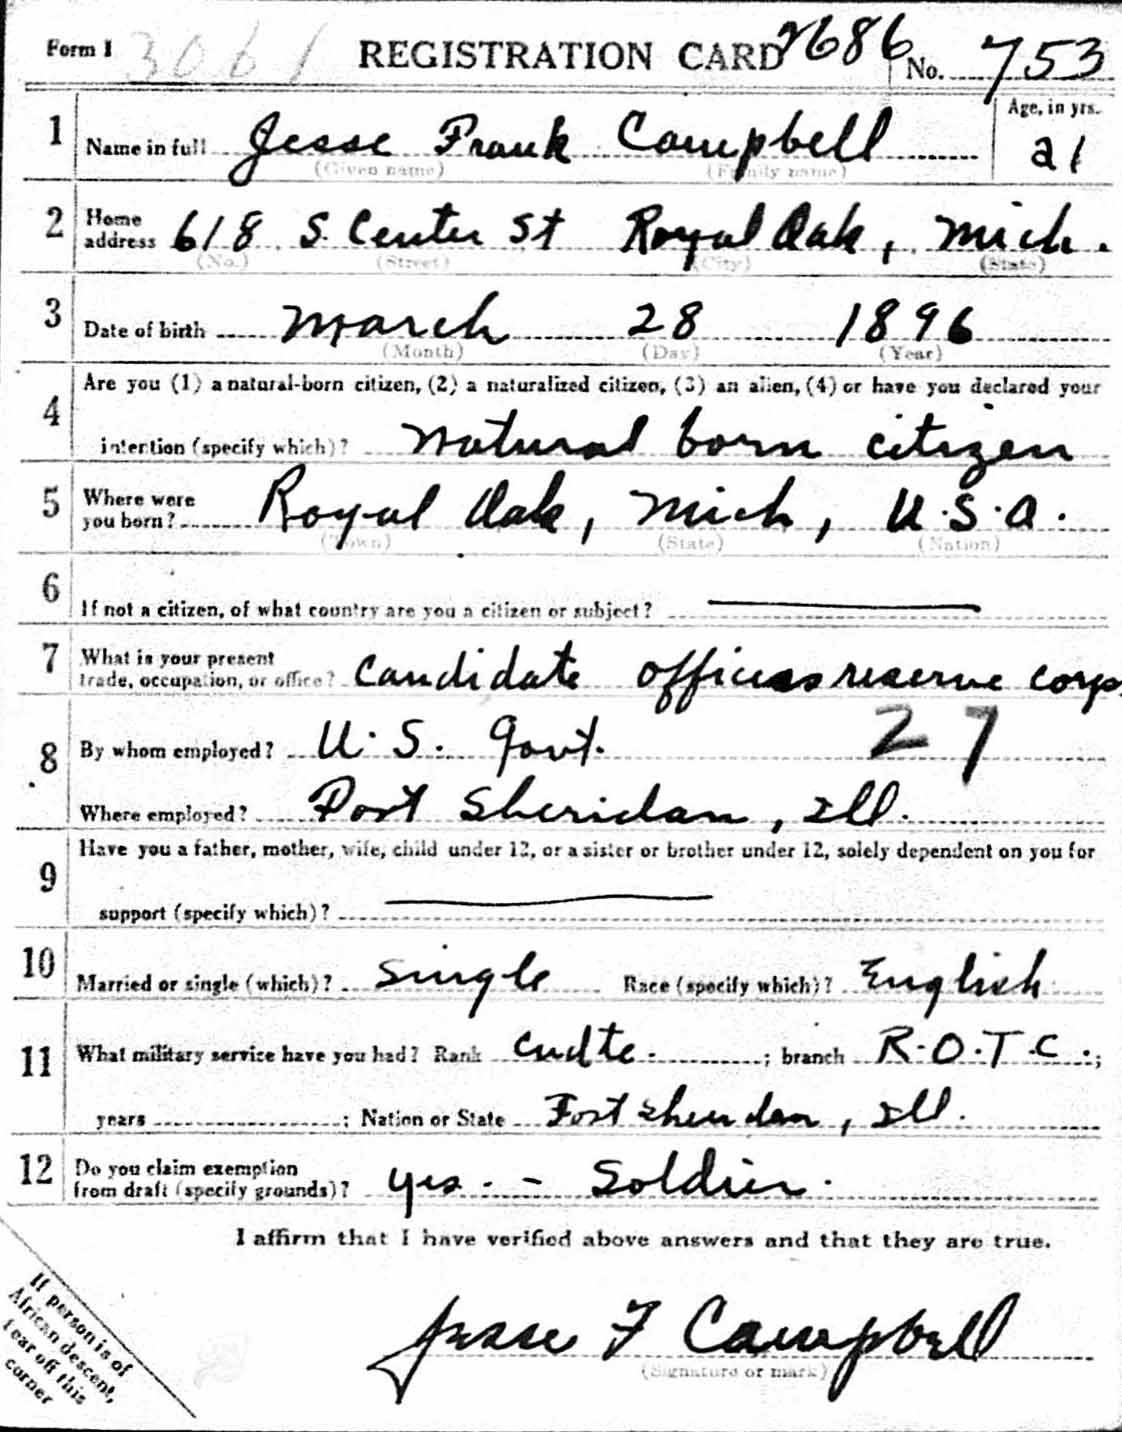 The front of Campbell's draft registration card.